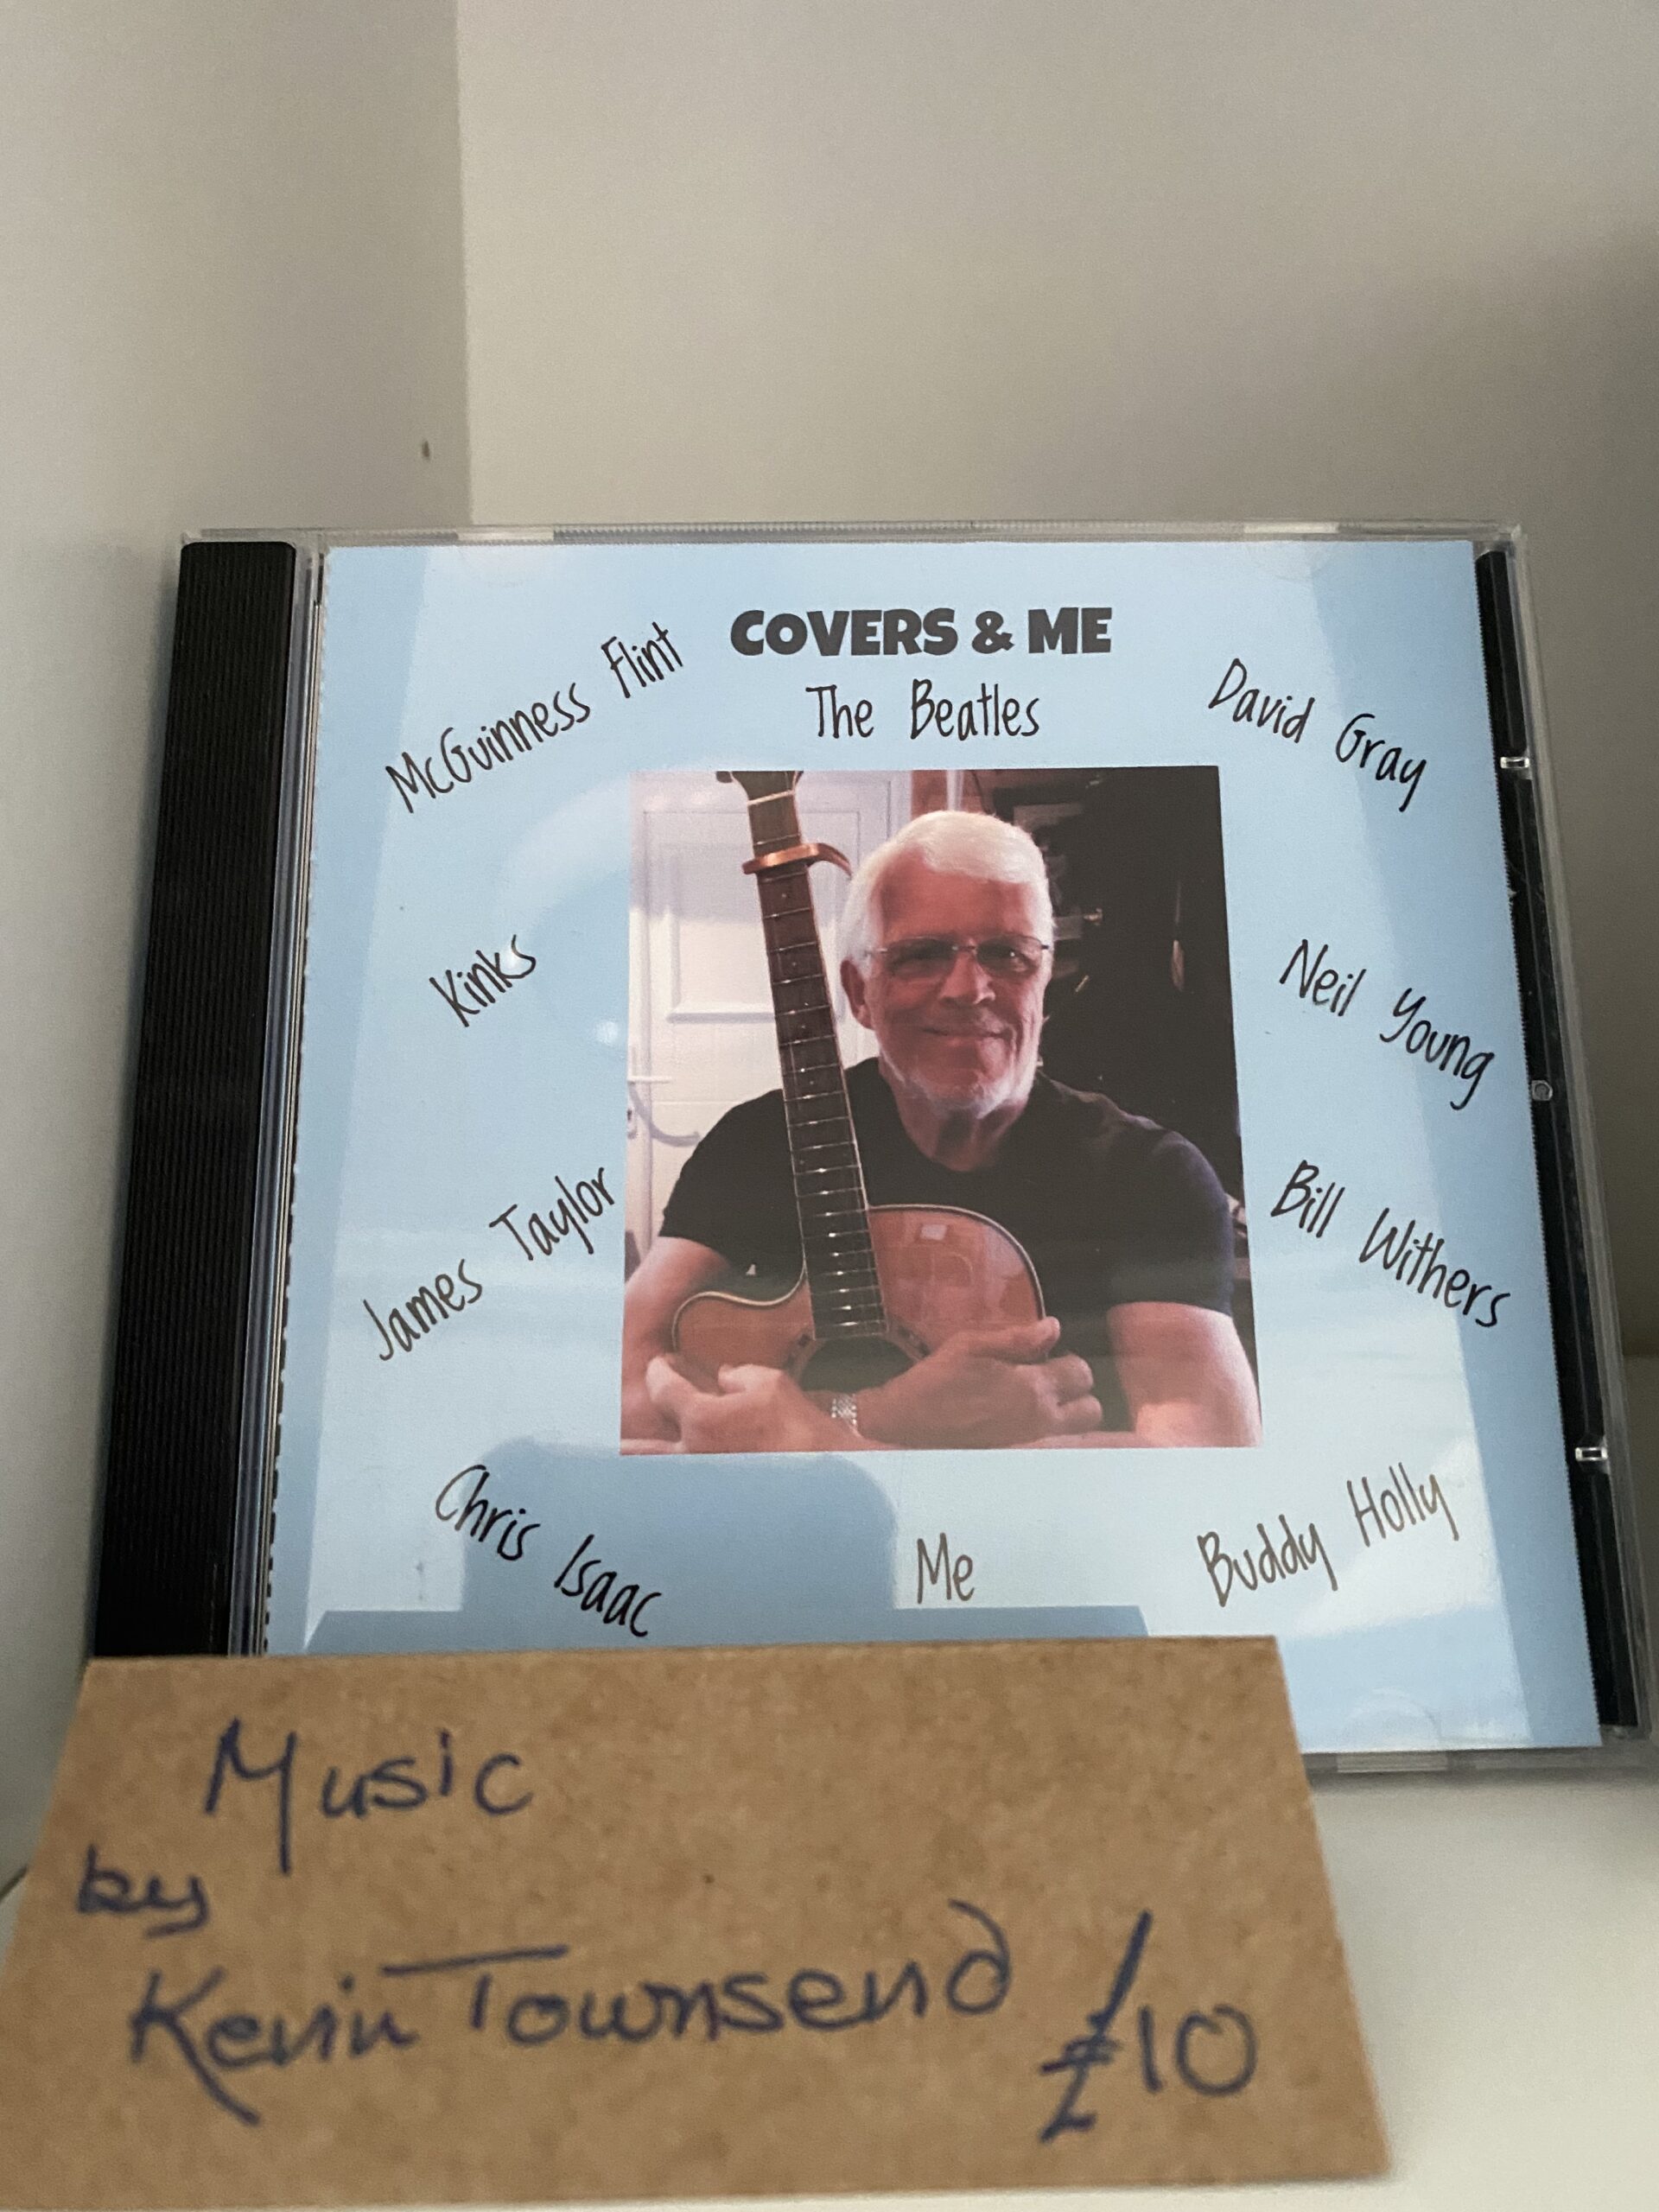 Covers & Me by Kevin Townsend